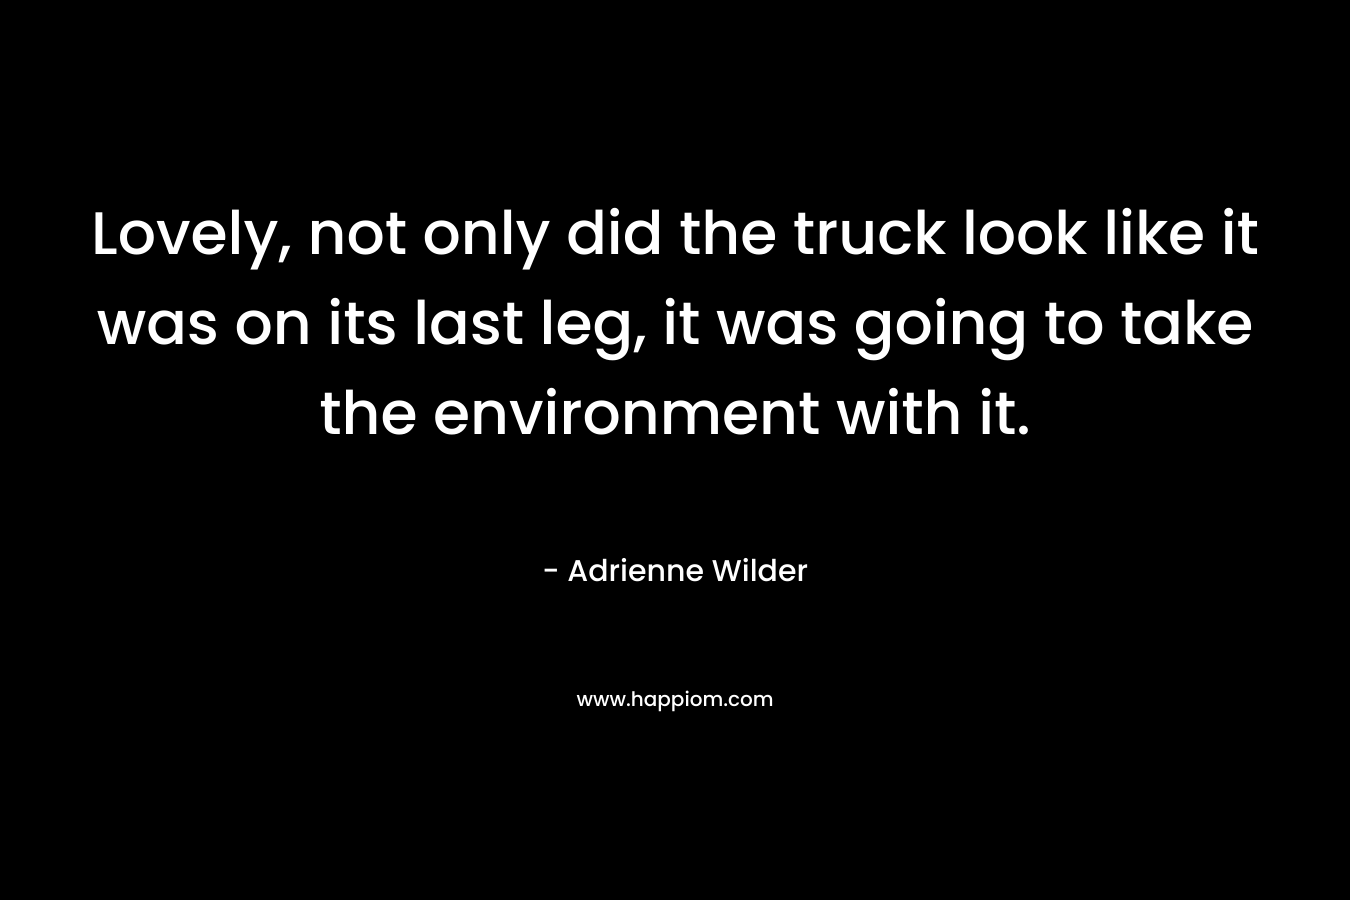 Lovely, not only did the truck look like it was on its last leg, it was going to take the environment with it. – Adrienne Wilder